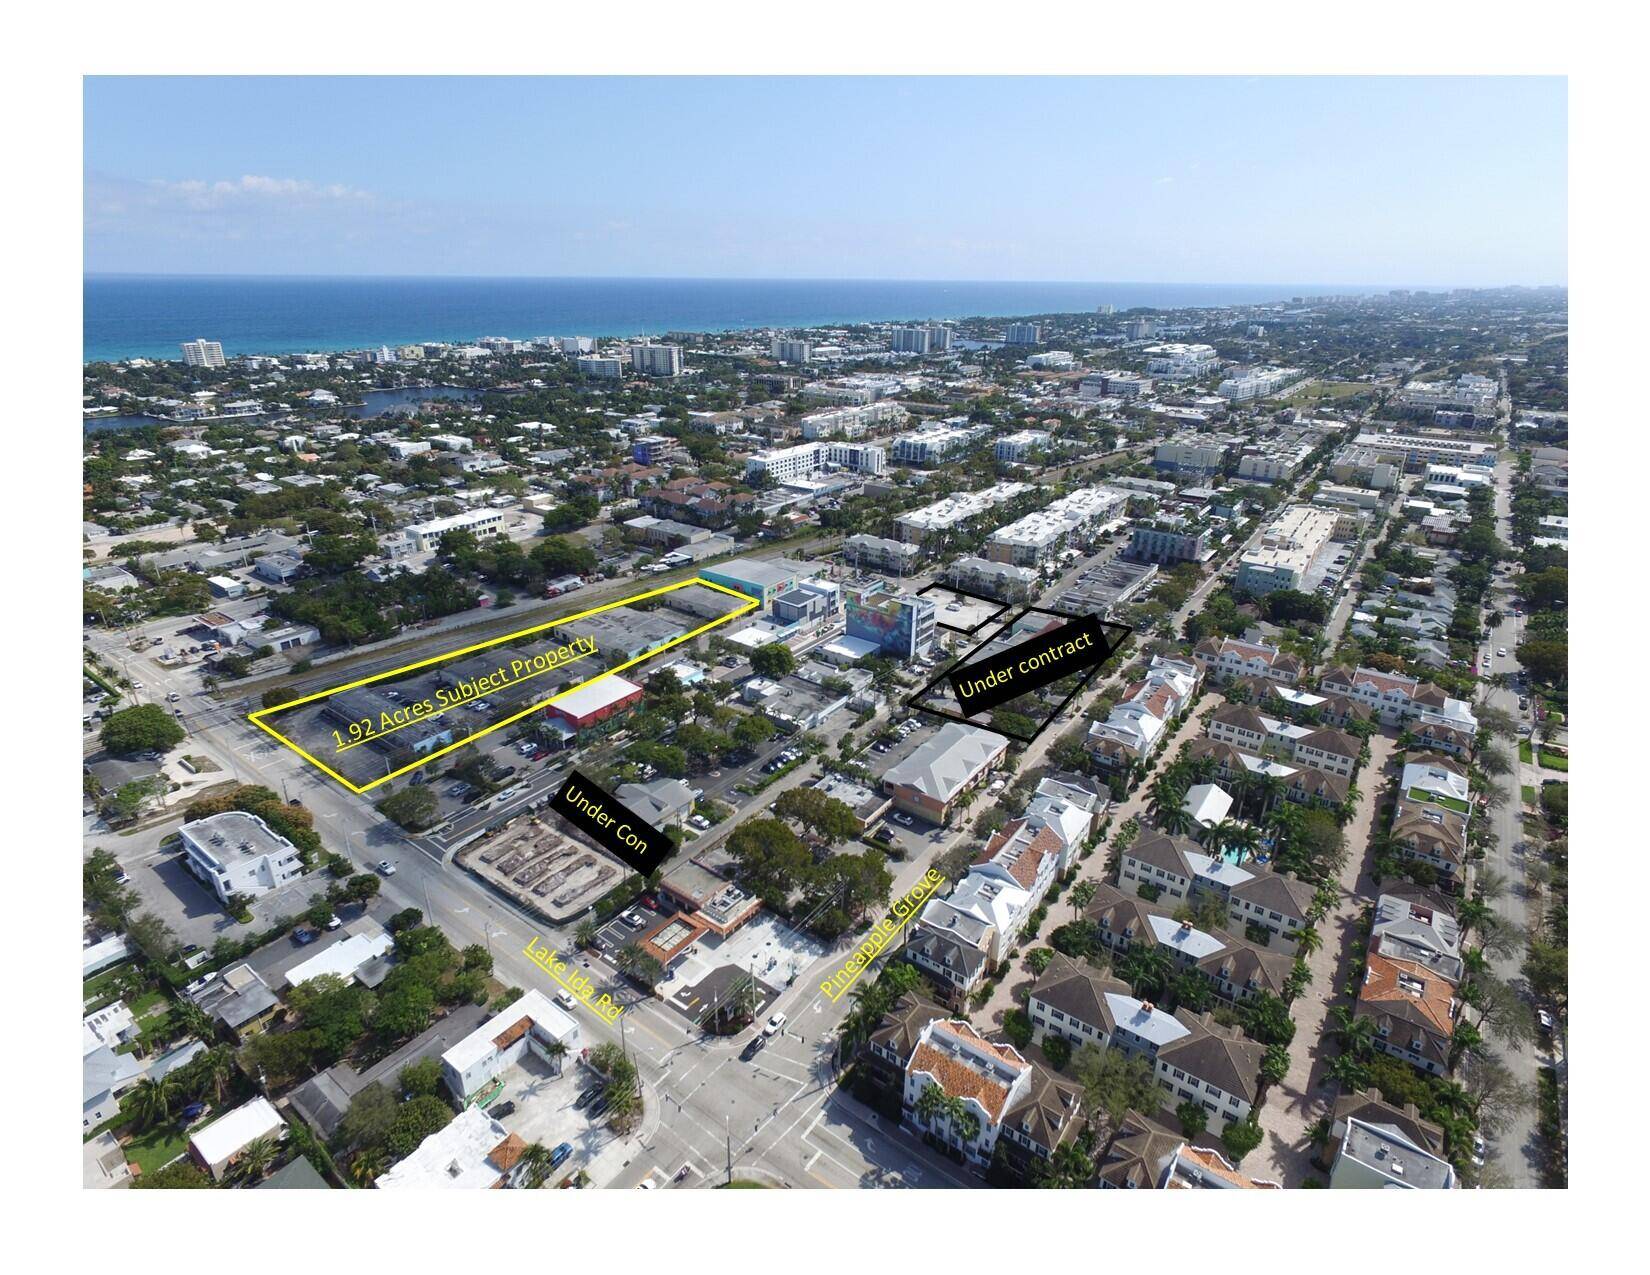 The Last 2 acre parcel available in Downtown Delray Beach.